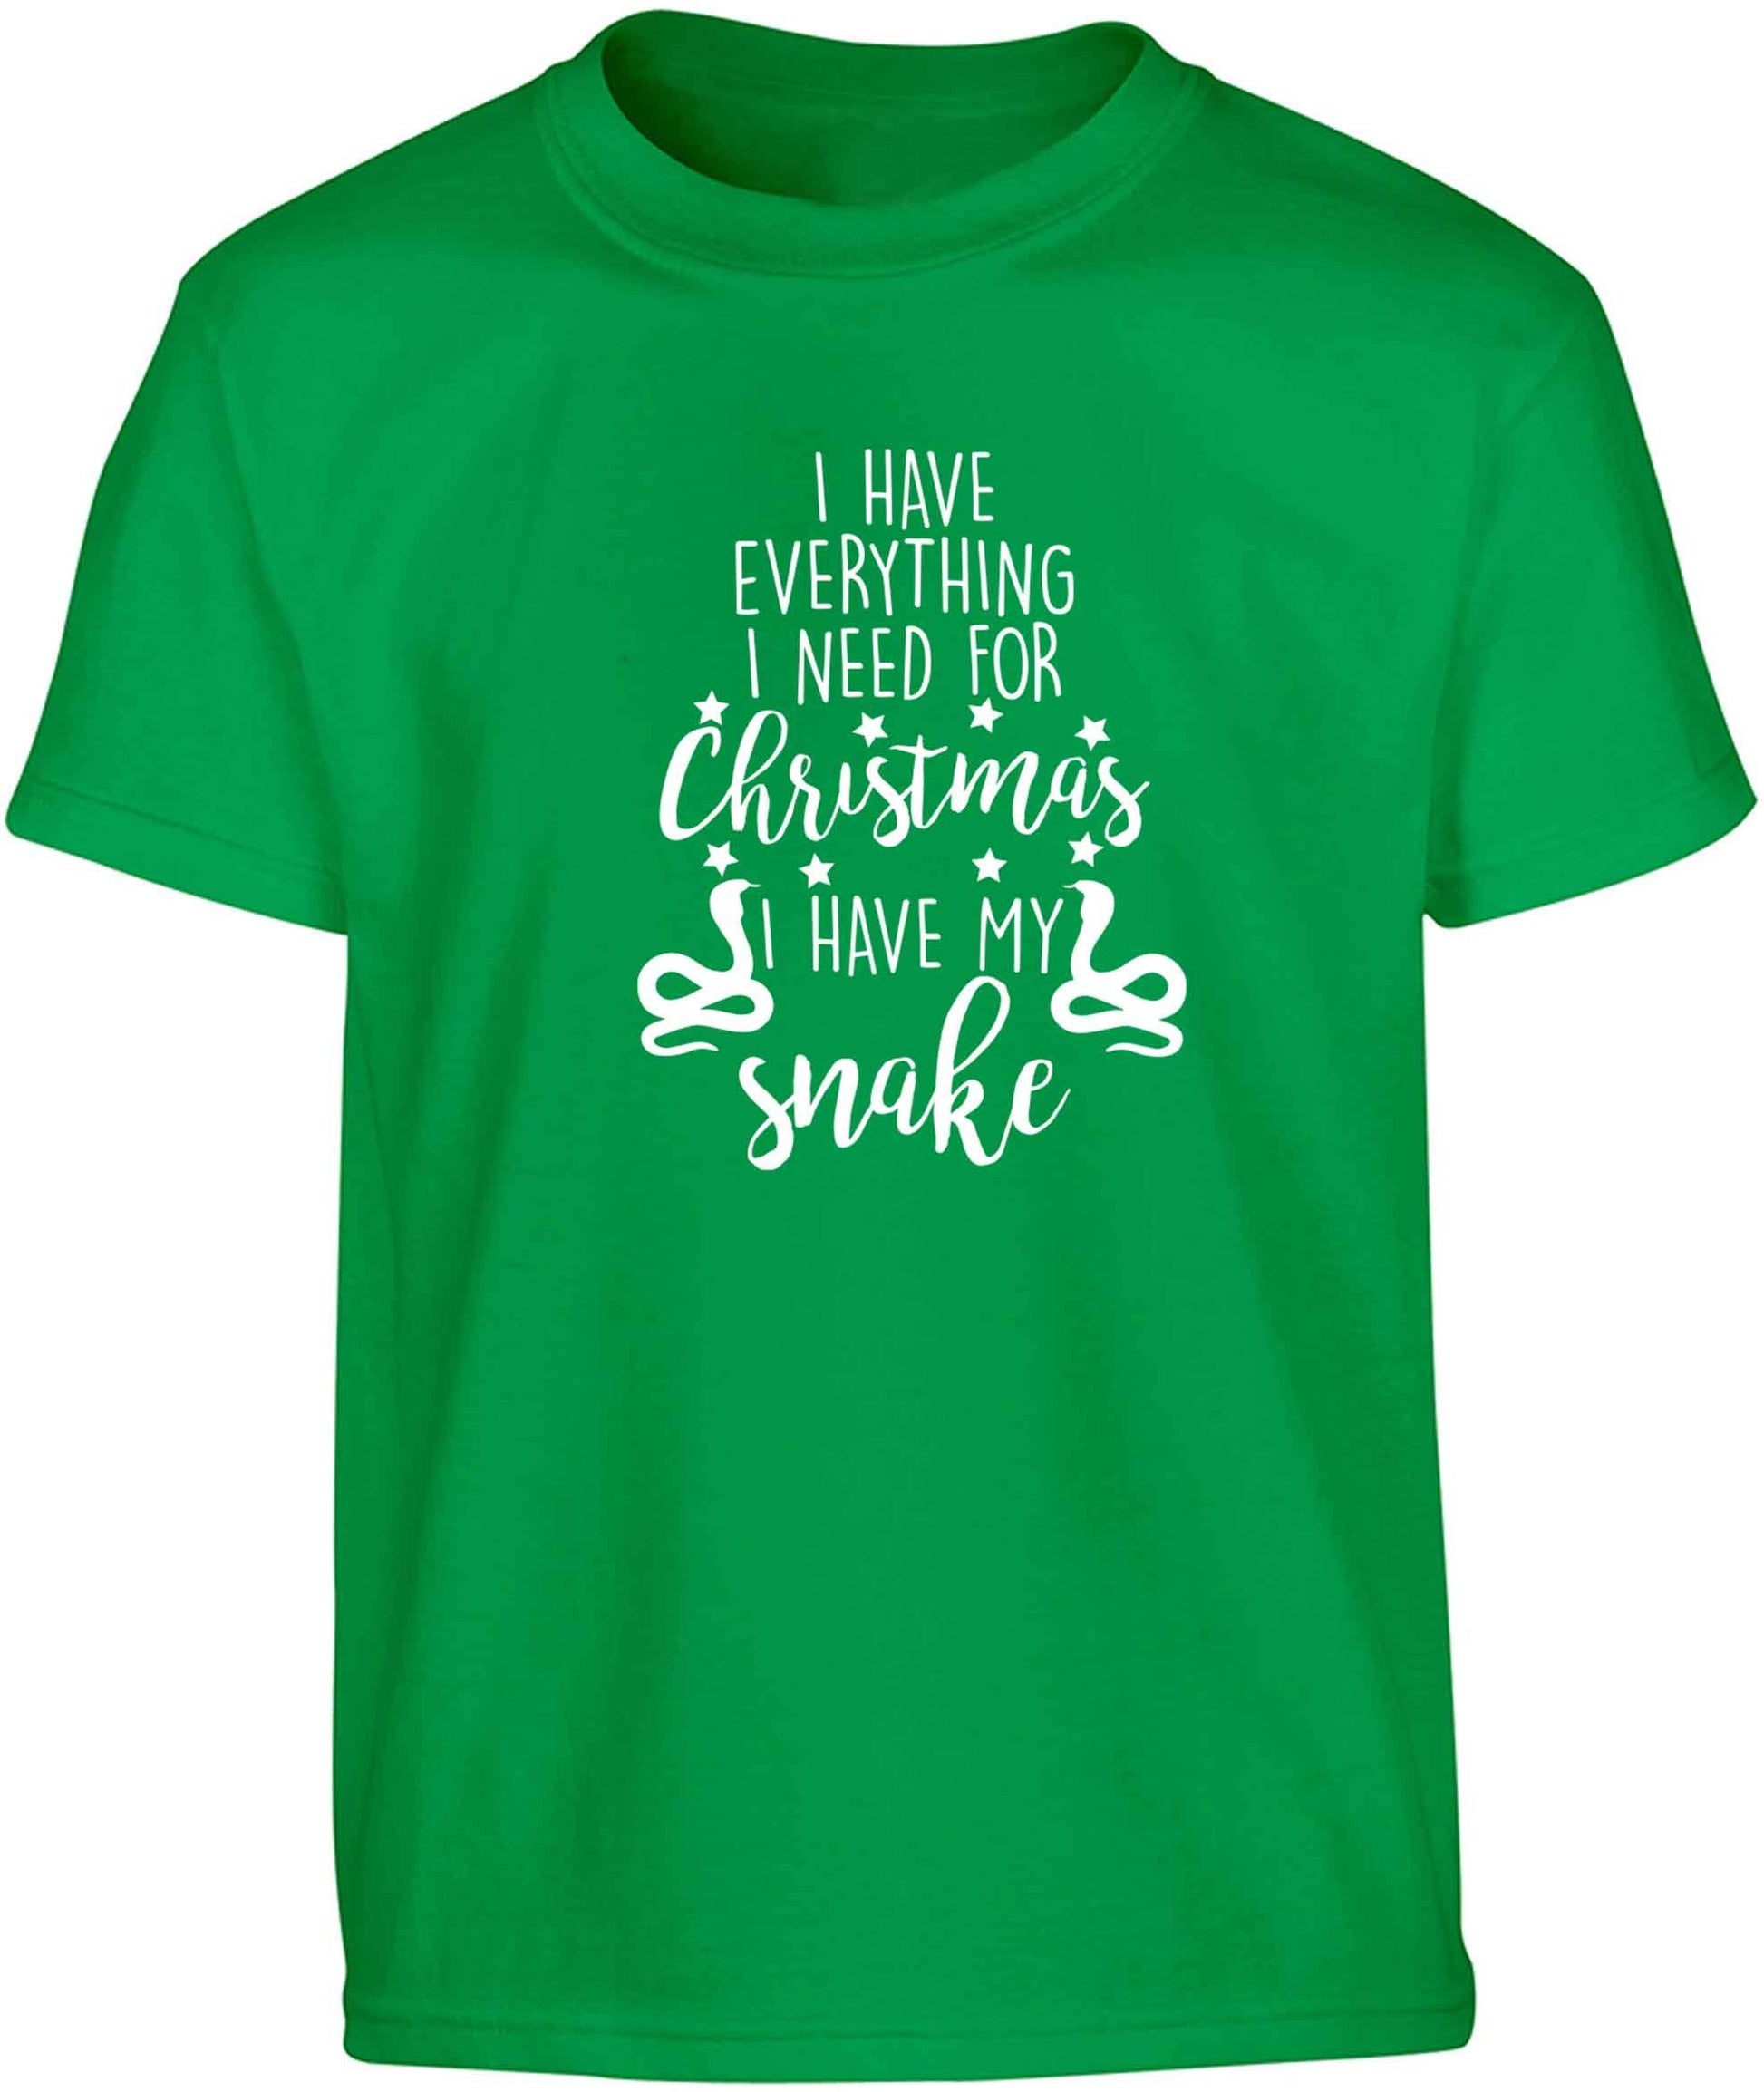 I have everything I need for Christmas I have my snake Children's green Tshirt 12-13 Years